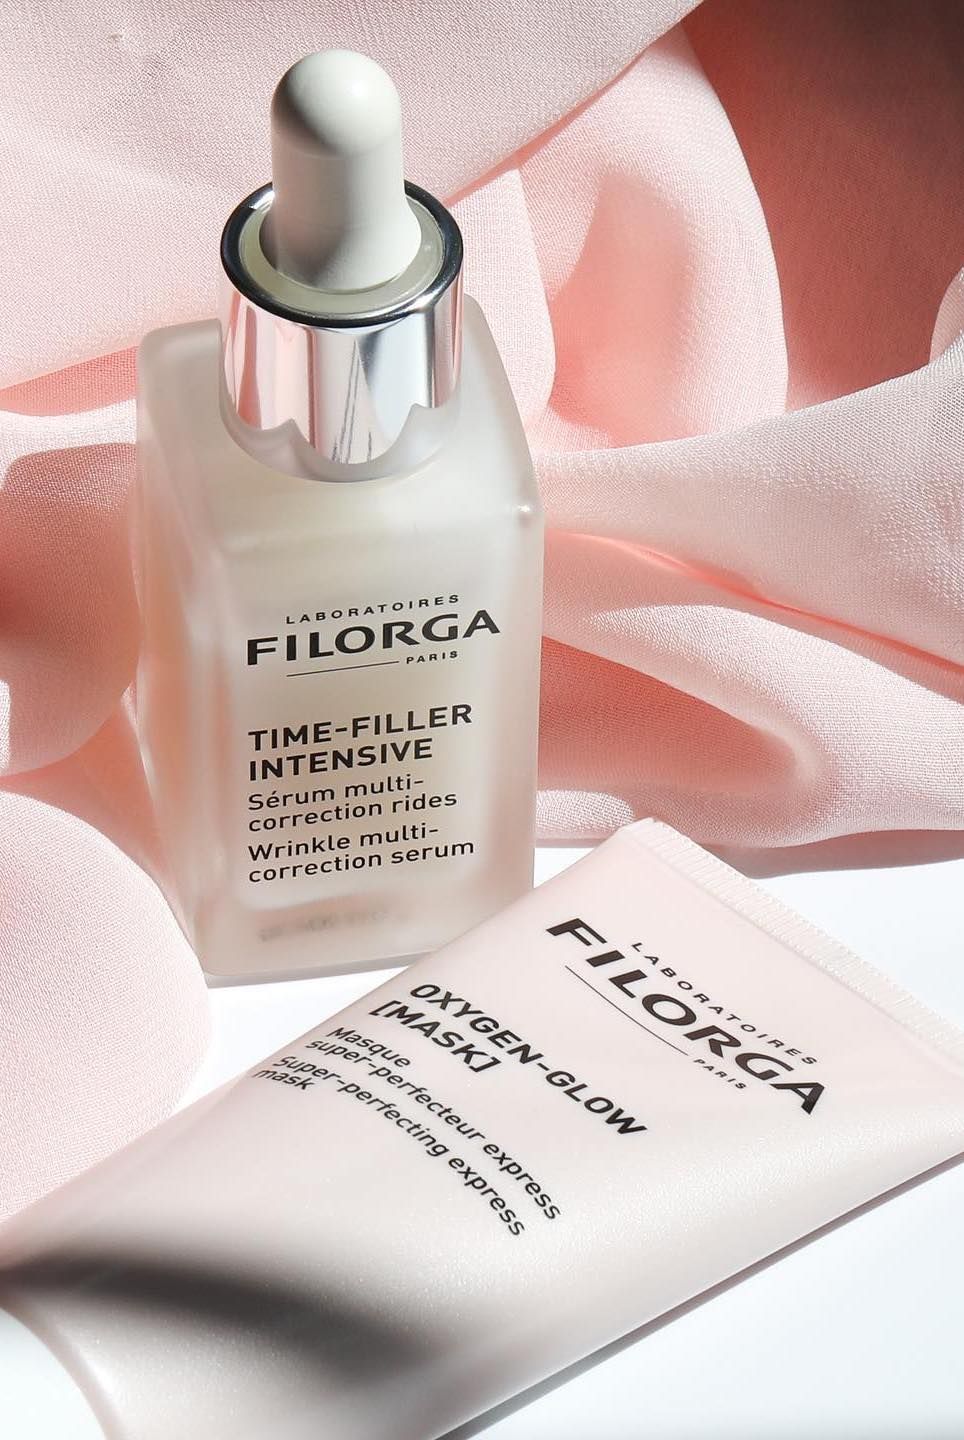 10 Best Filorga Products from French Pharmacies